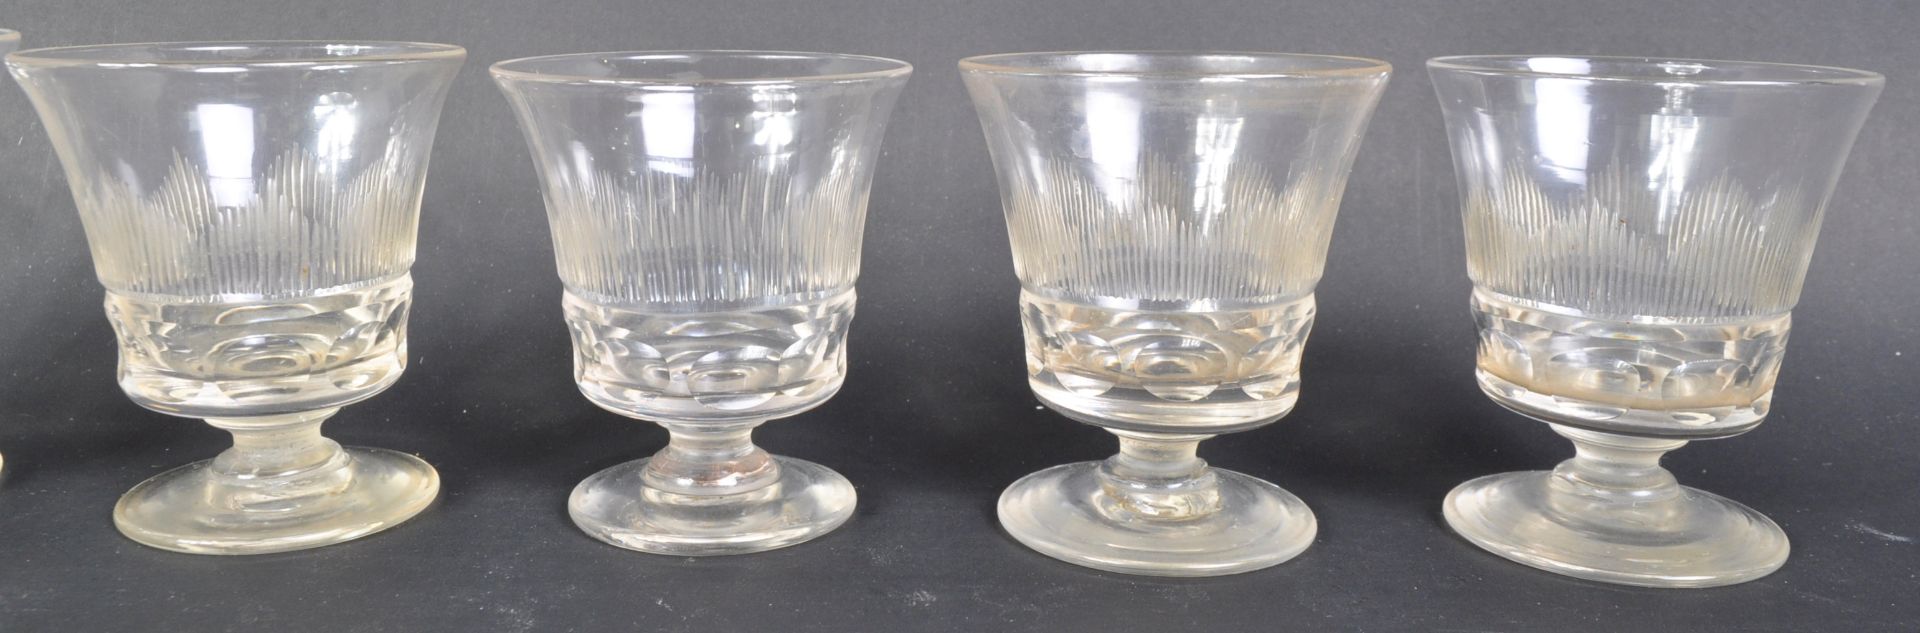 SET OF EARLY 19TH CENTURY GEORGIAN LIQUEUR GLASSES - Image 7 of 9